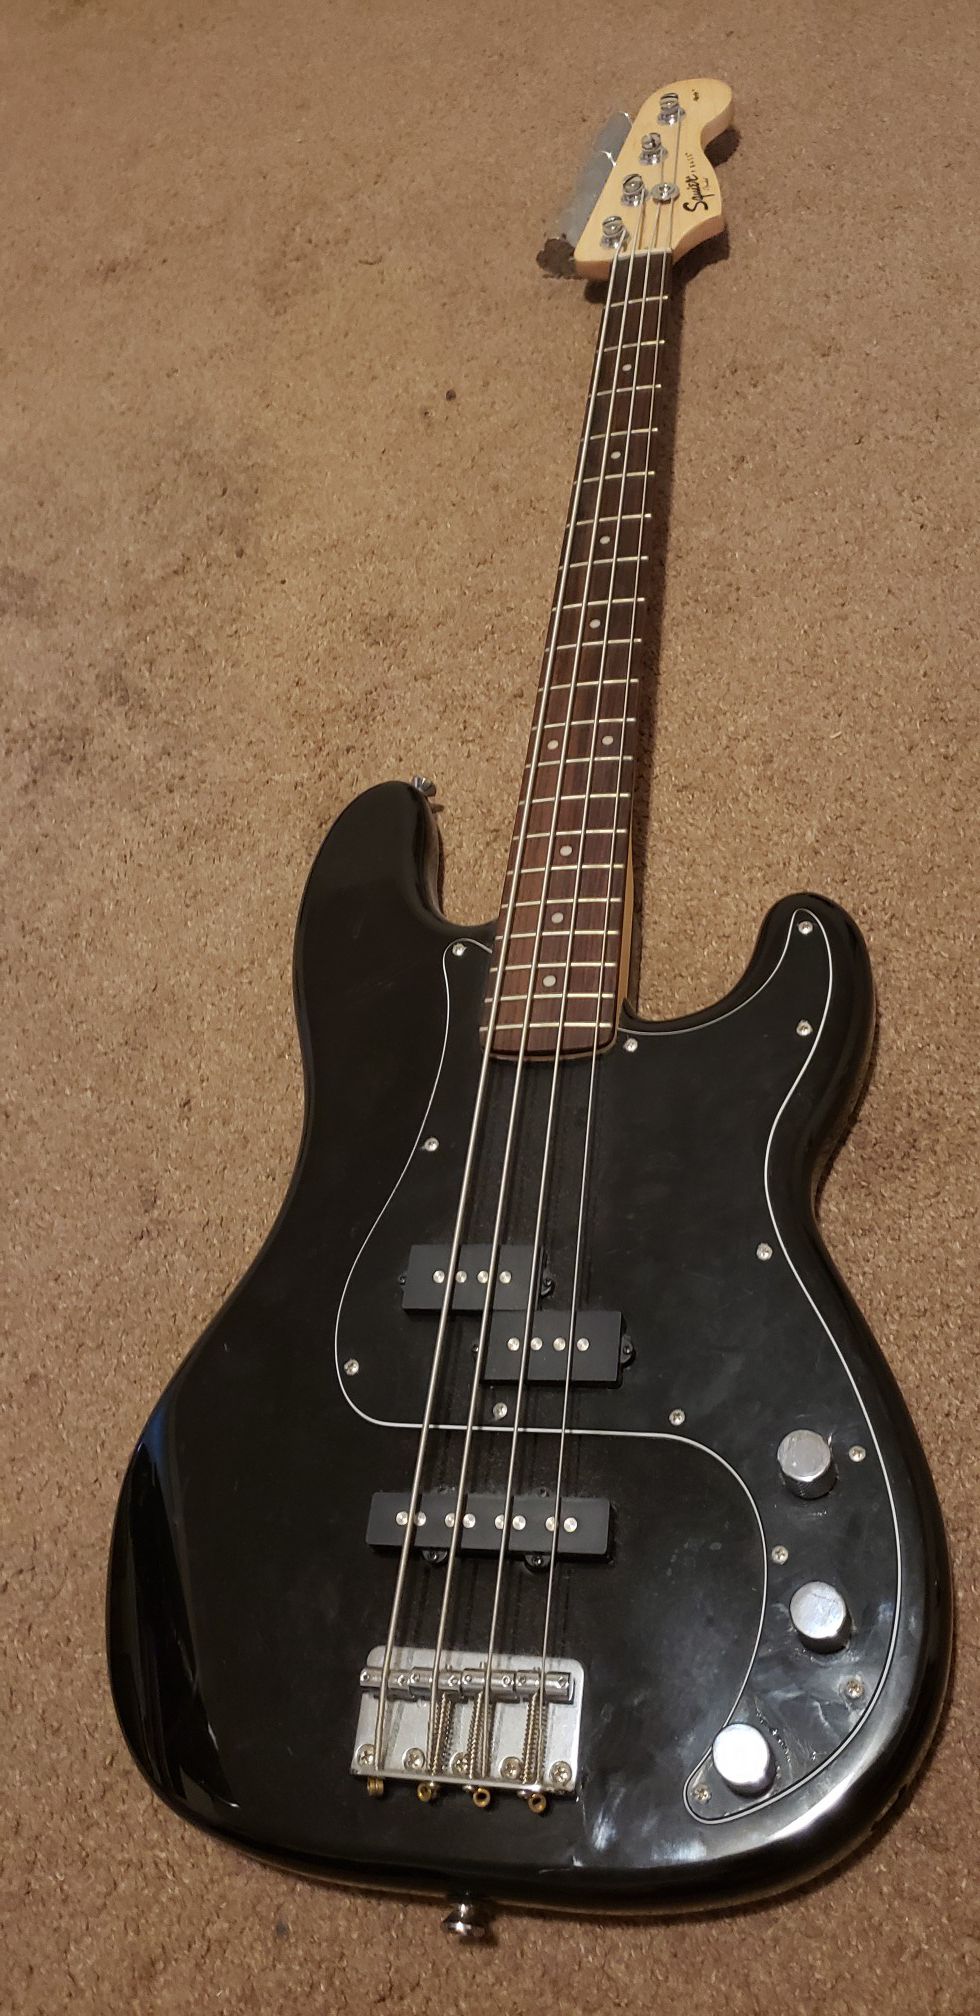 Squier Bass Guitar with fender amp